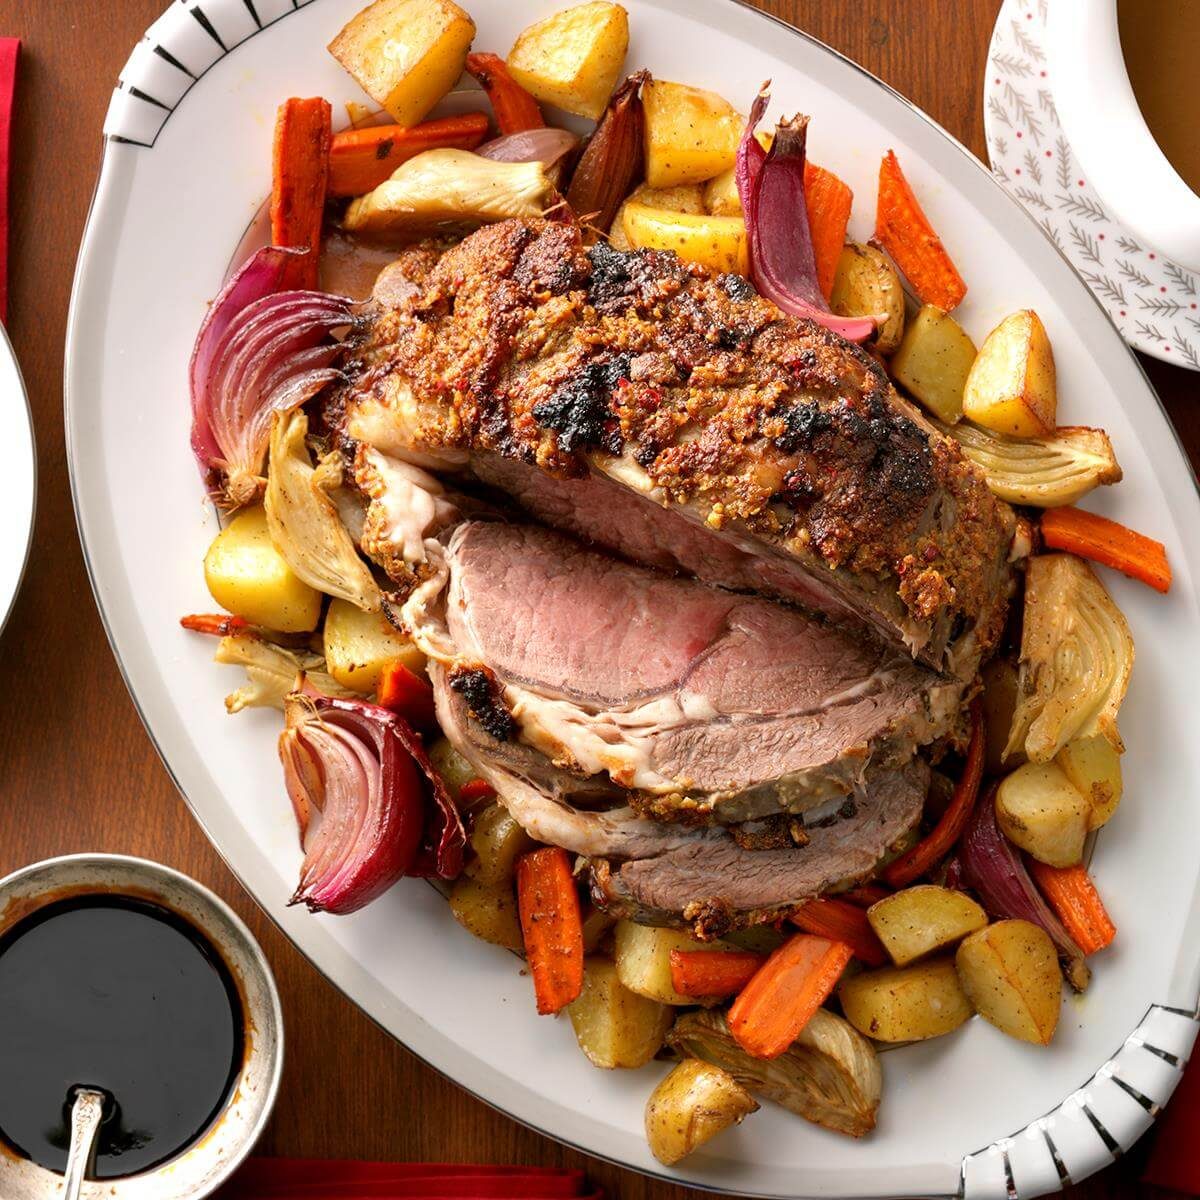 Top 90+ Pictures Pictures Of Prime Rib Dinners Full HD, 2k, 4k